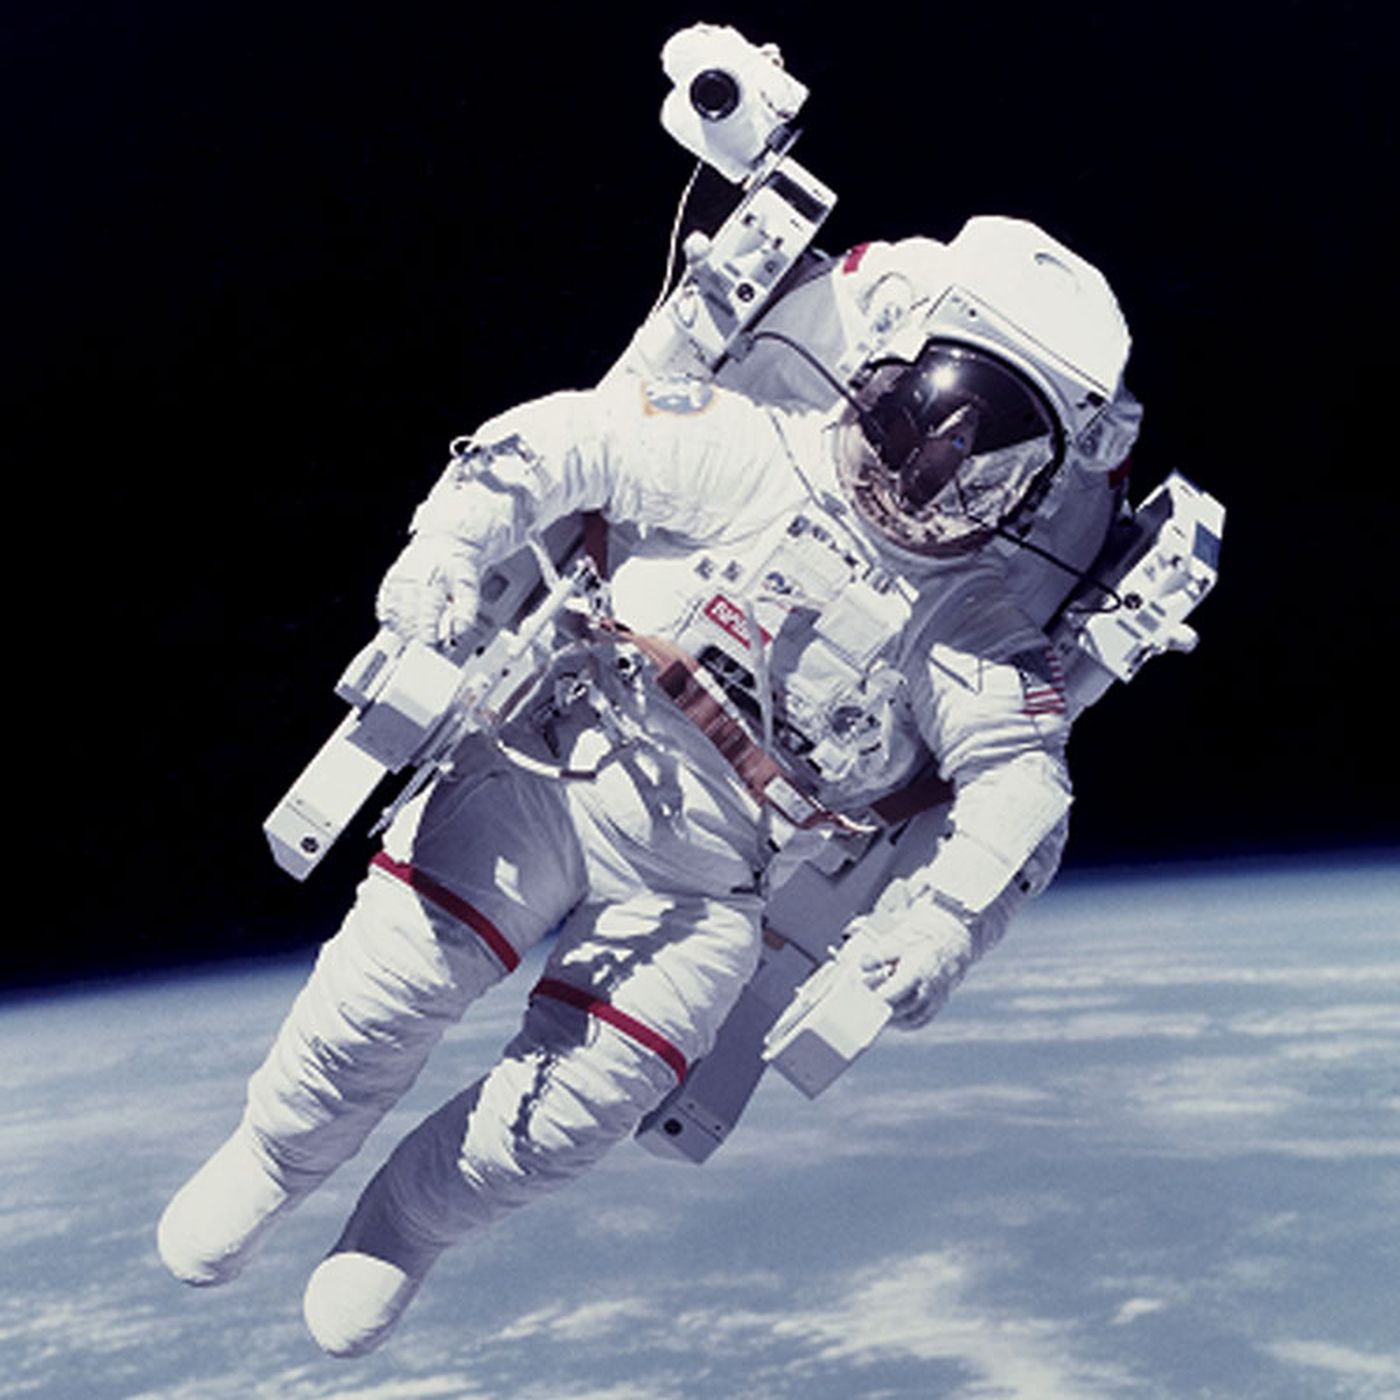 New 'Take Me Home' button could guide astronauts to safety during ...